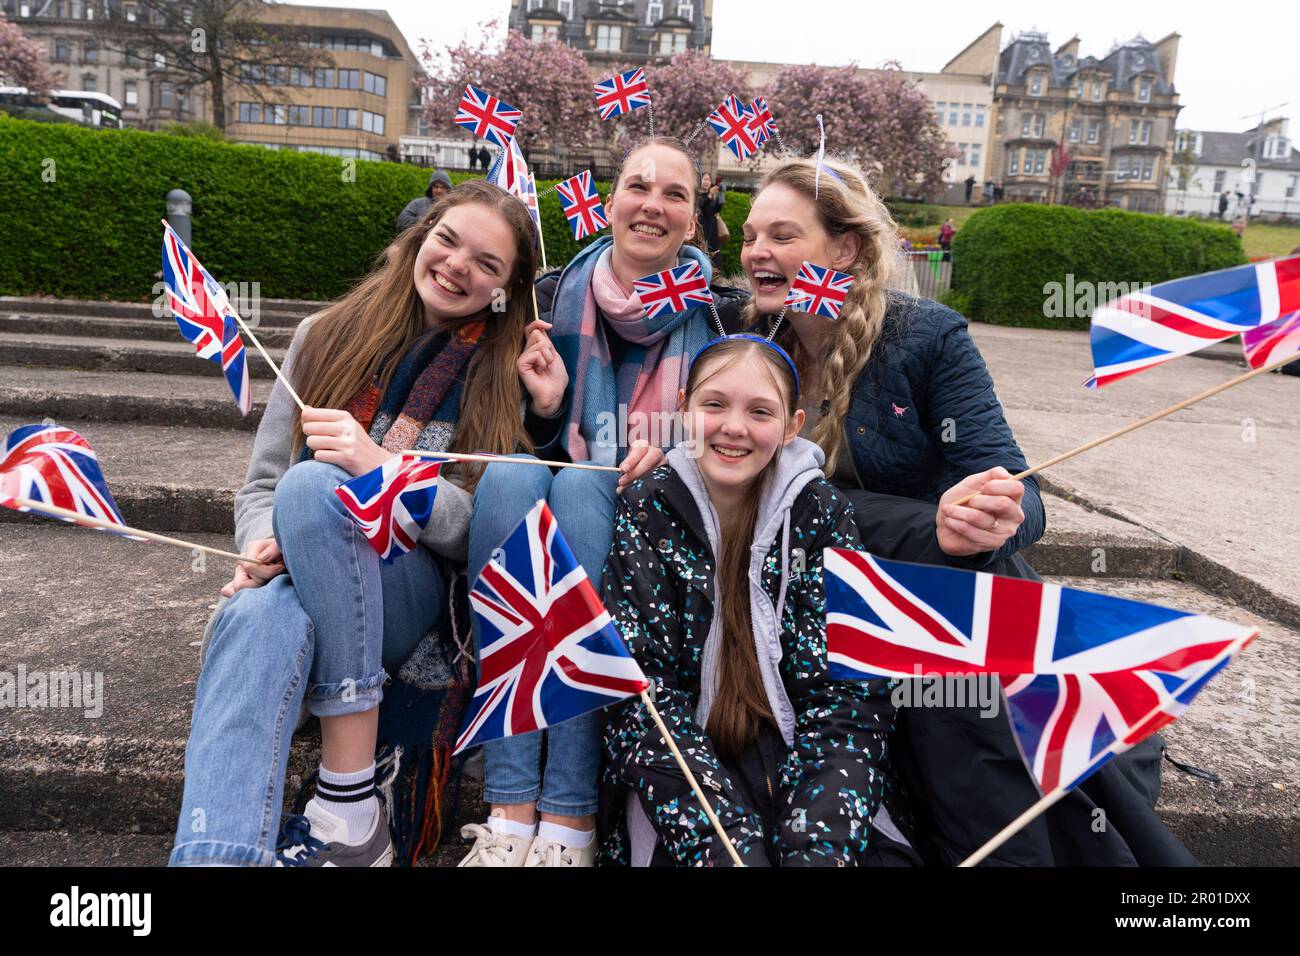 Edinburgh, Scotland, UK. 6 May 2023. Scenes from Edinburgh on the day of Coronation of King Charles III. The Hunt sisters from Cornwall watching the Coronation from West Princes Street Gardens. Iain Masterton/Alamy Live News Stock Photo